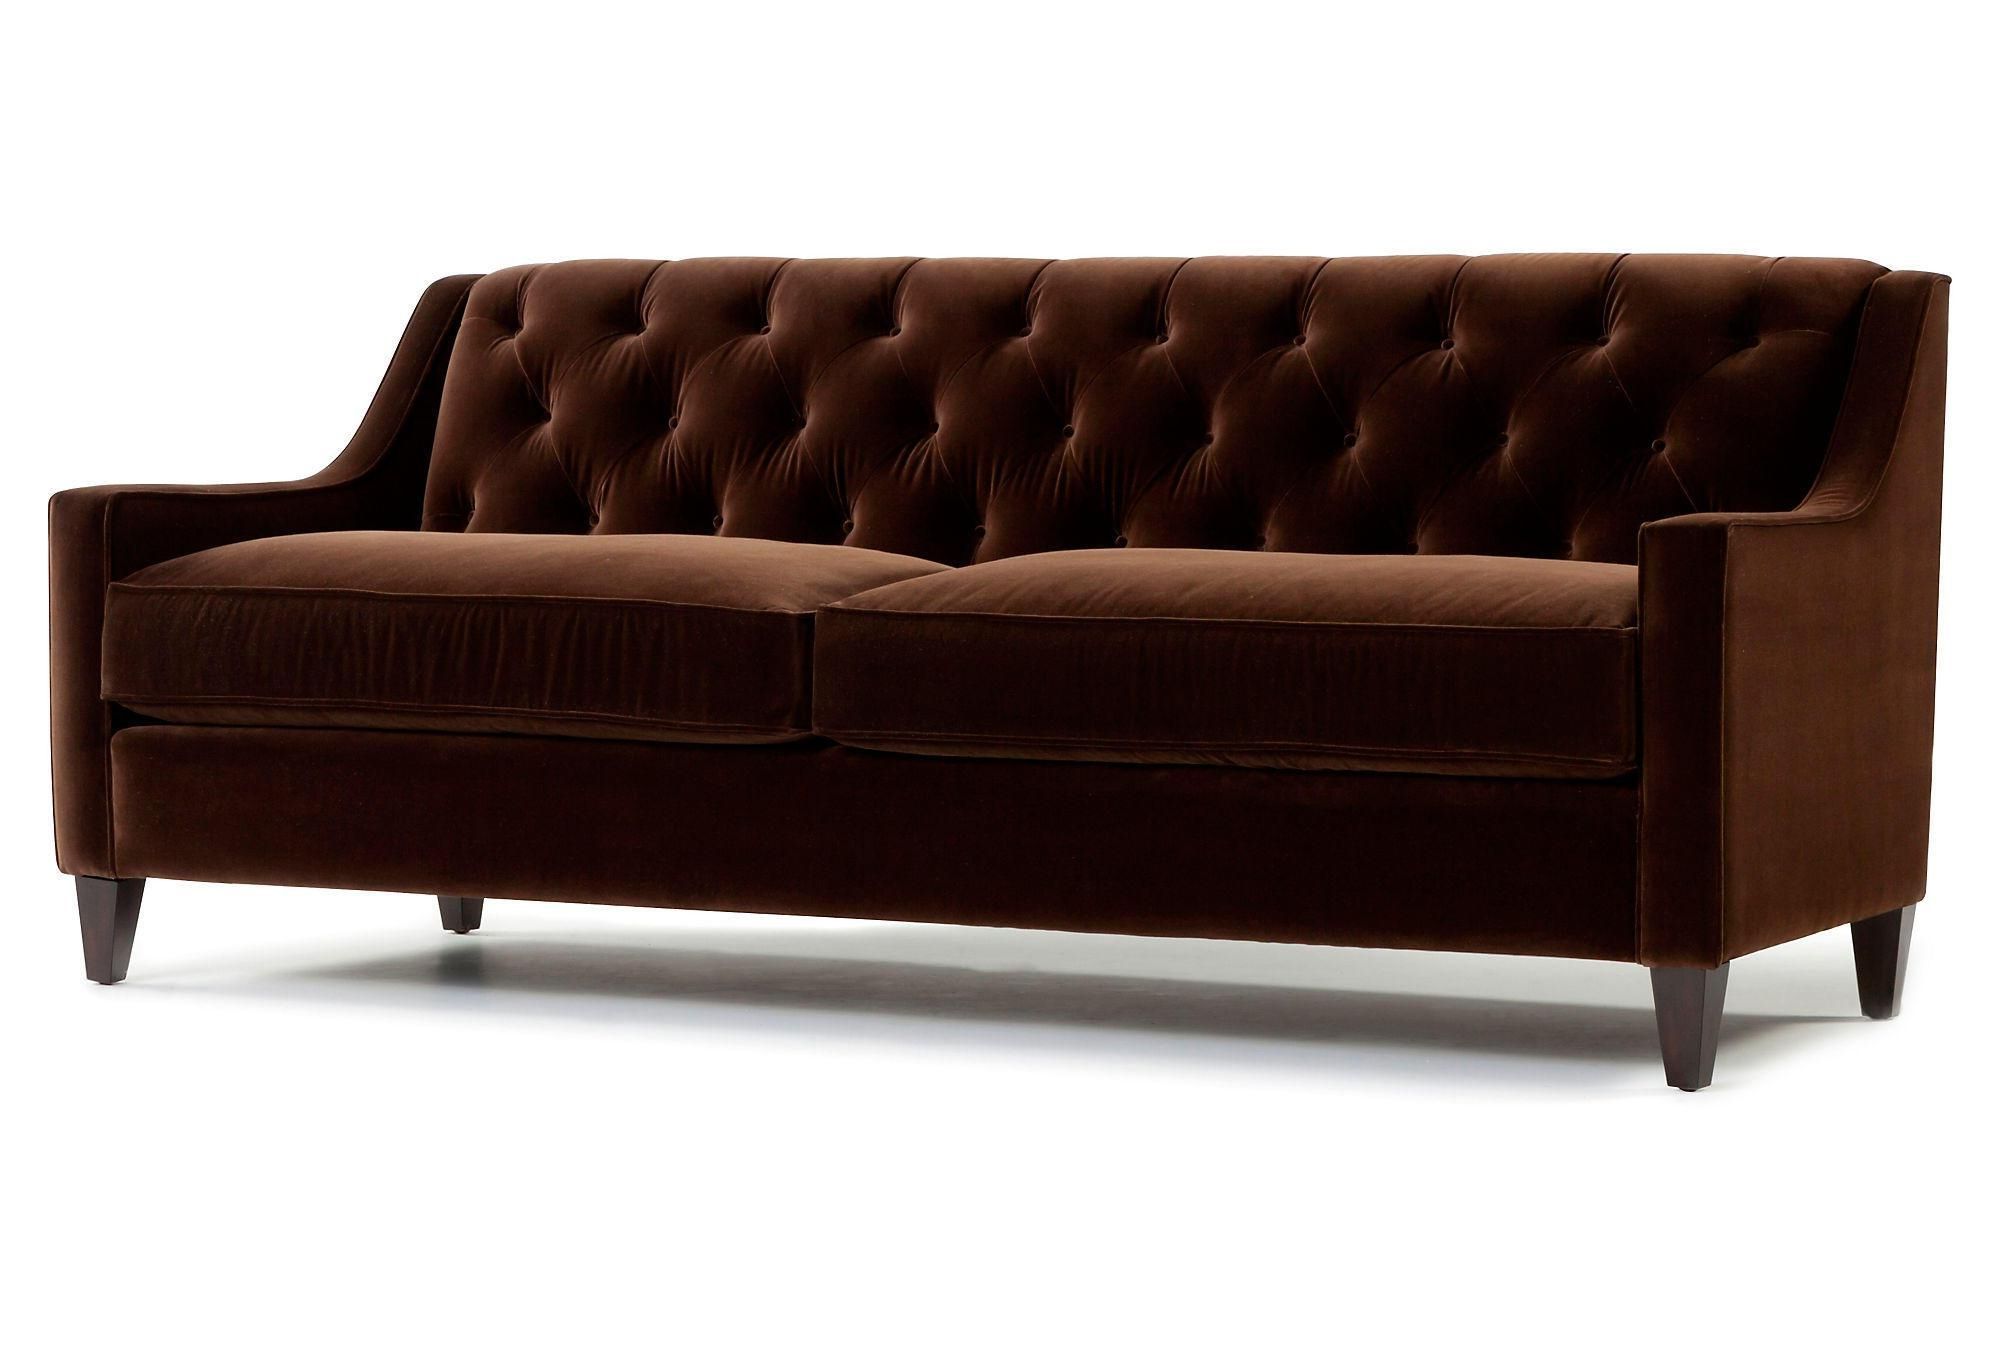 2021 Latest Brown Velvet Sofas | Sofa Ideas With Sofas In Chocolate Brown (Gallery 15 of 20)